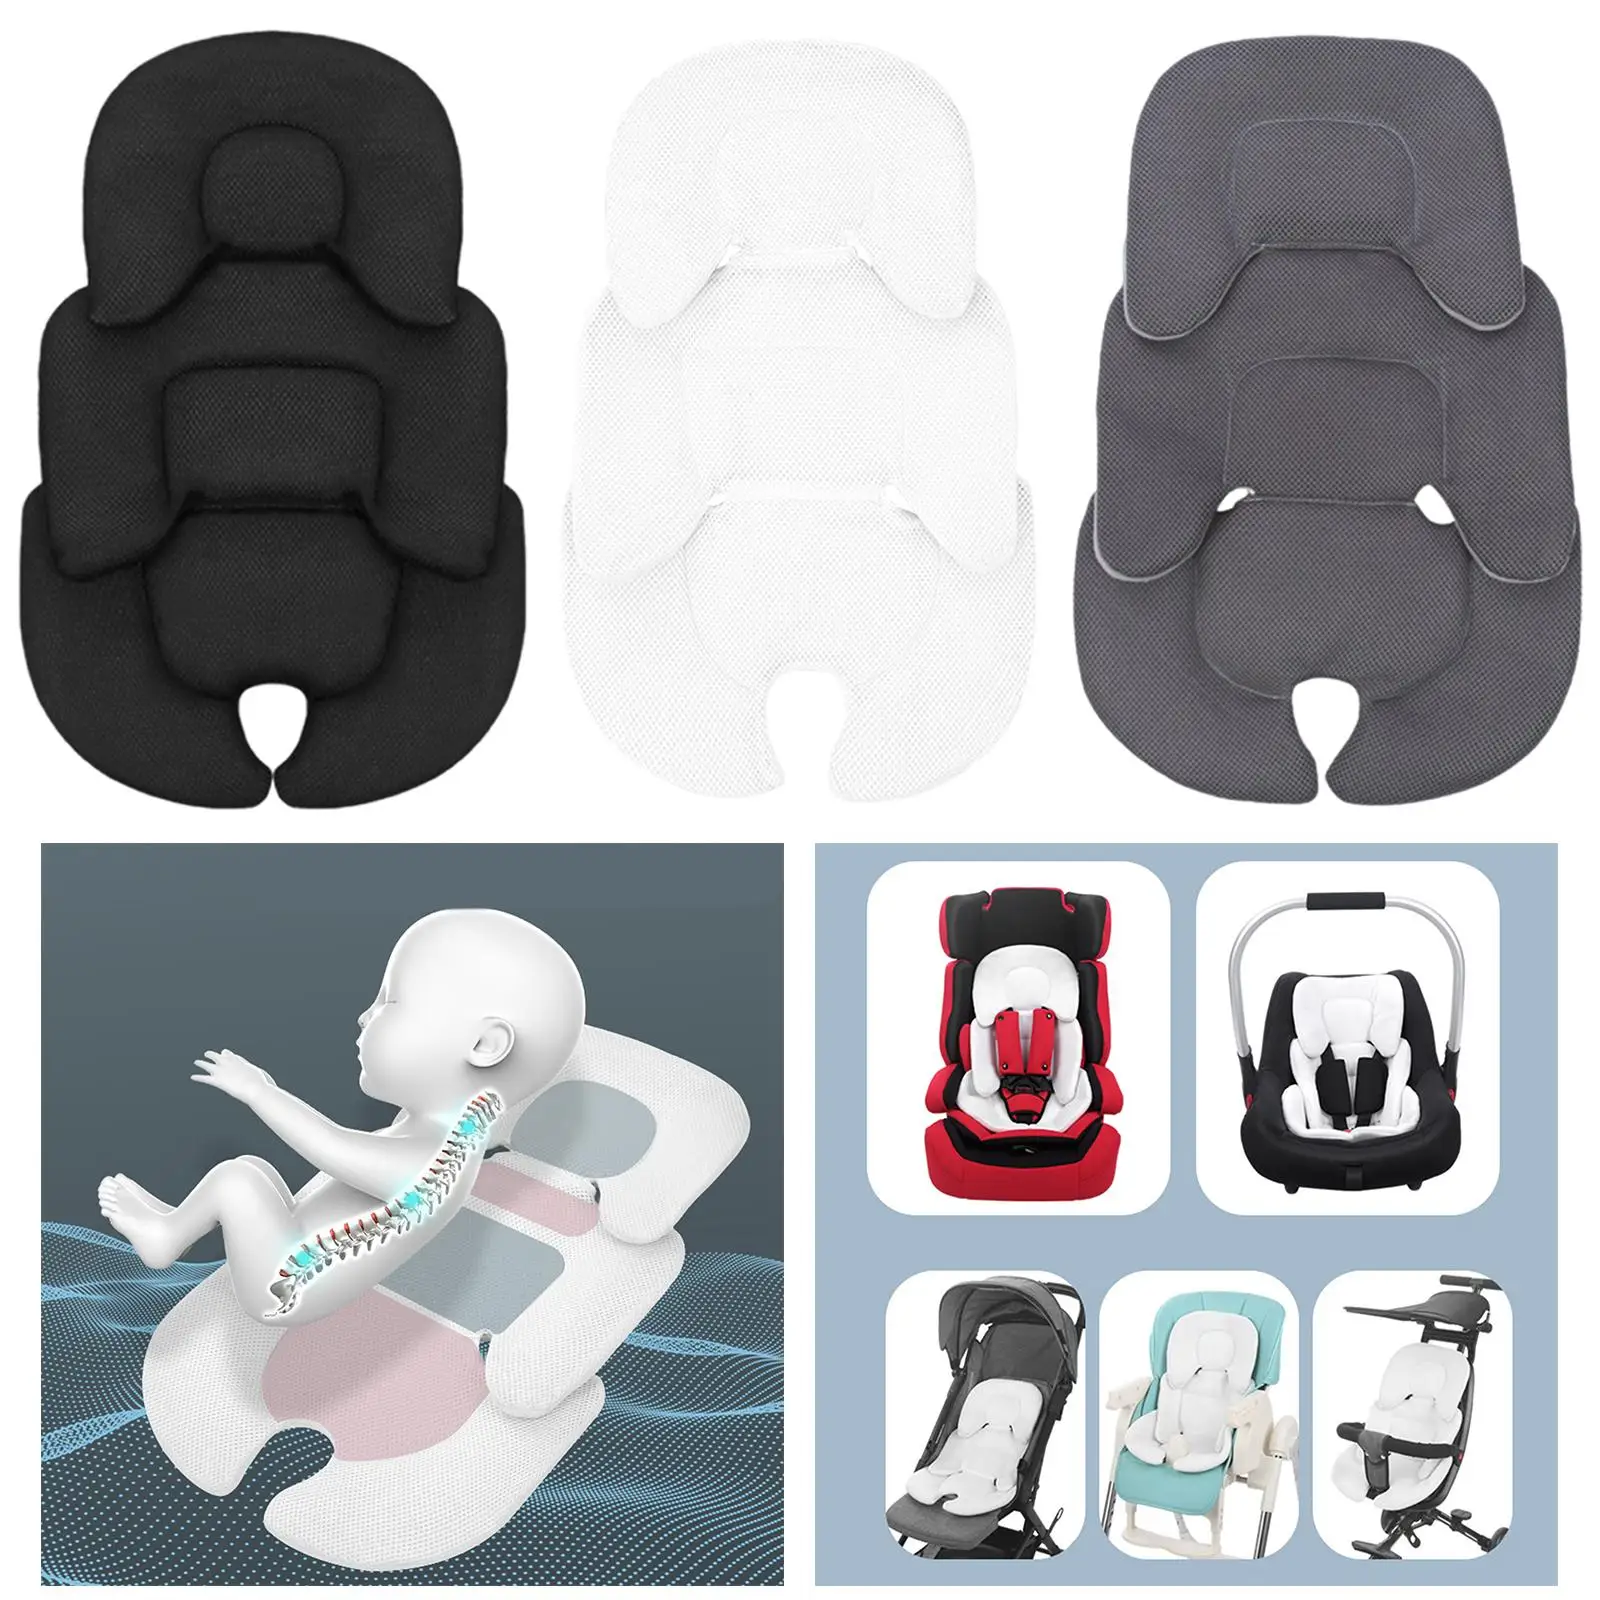 Baby Stroller Cushion Breathable Soft Head and Body Support Pillow Polar Fleece Car Seat Pad Liner for Buggy Pushchair Pram